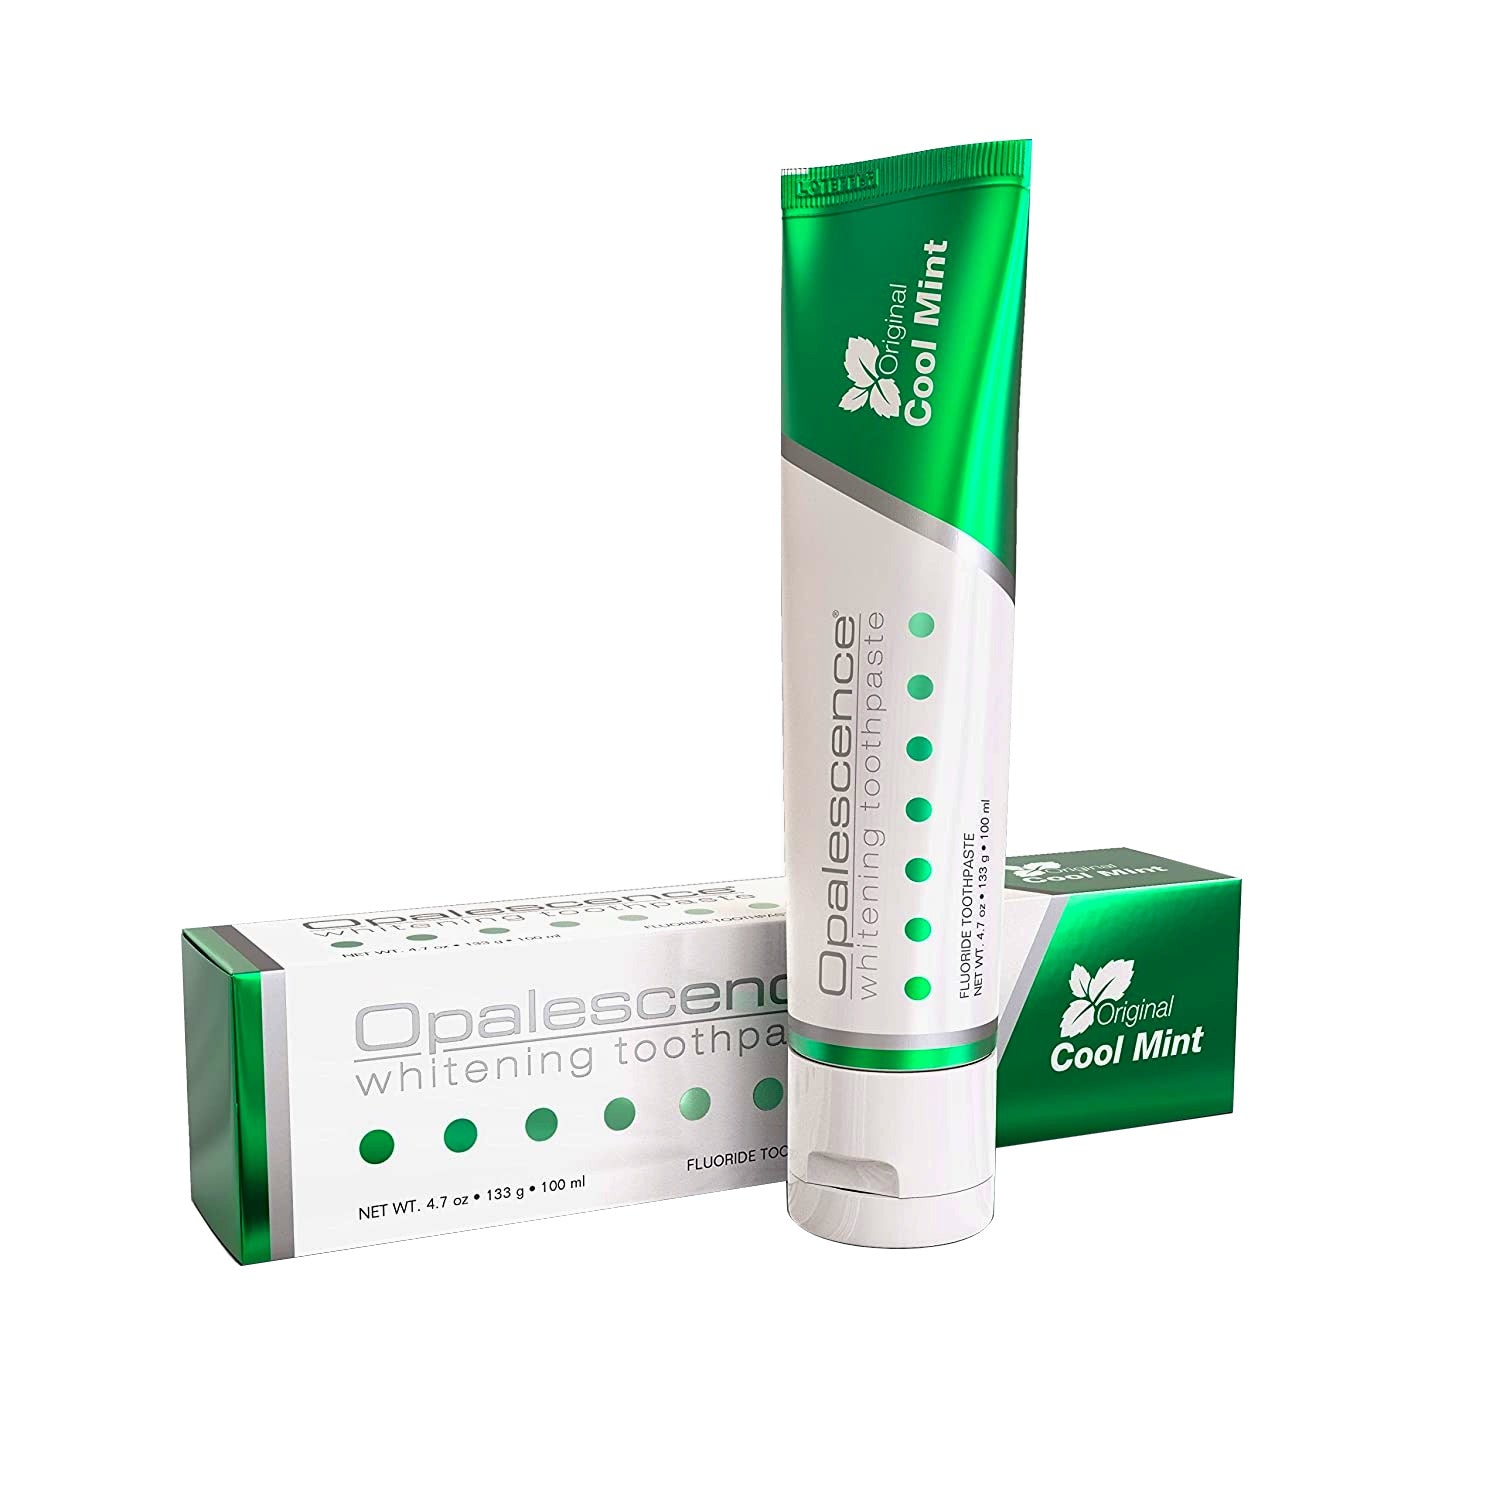 Opalescence Whitening tooth paste